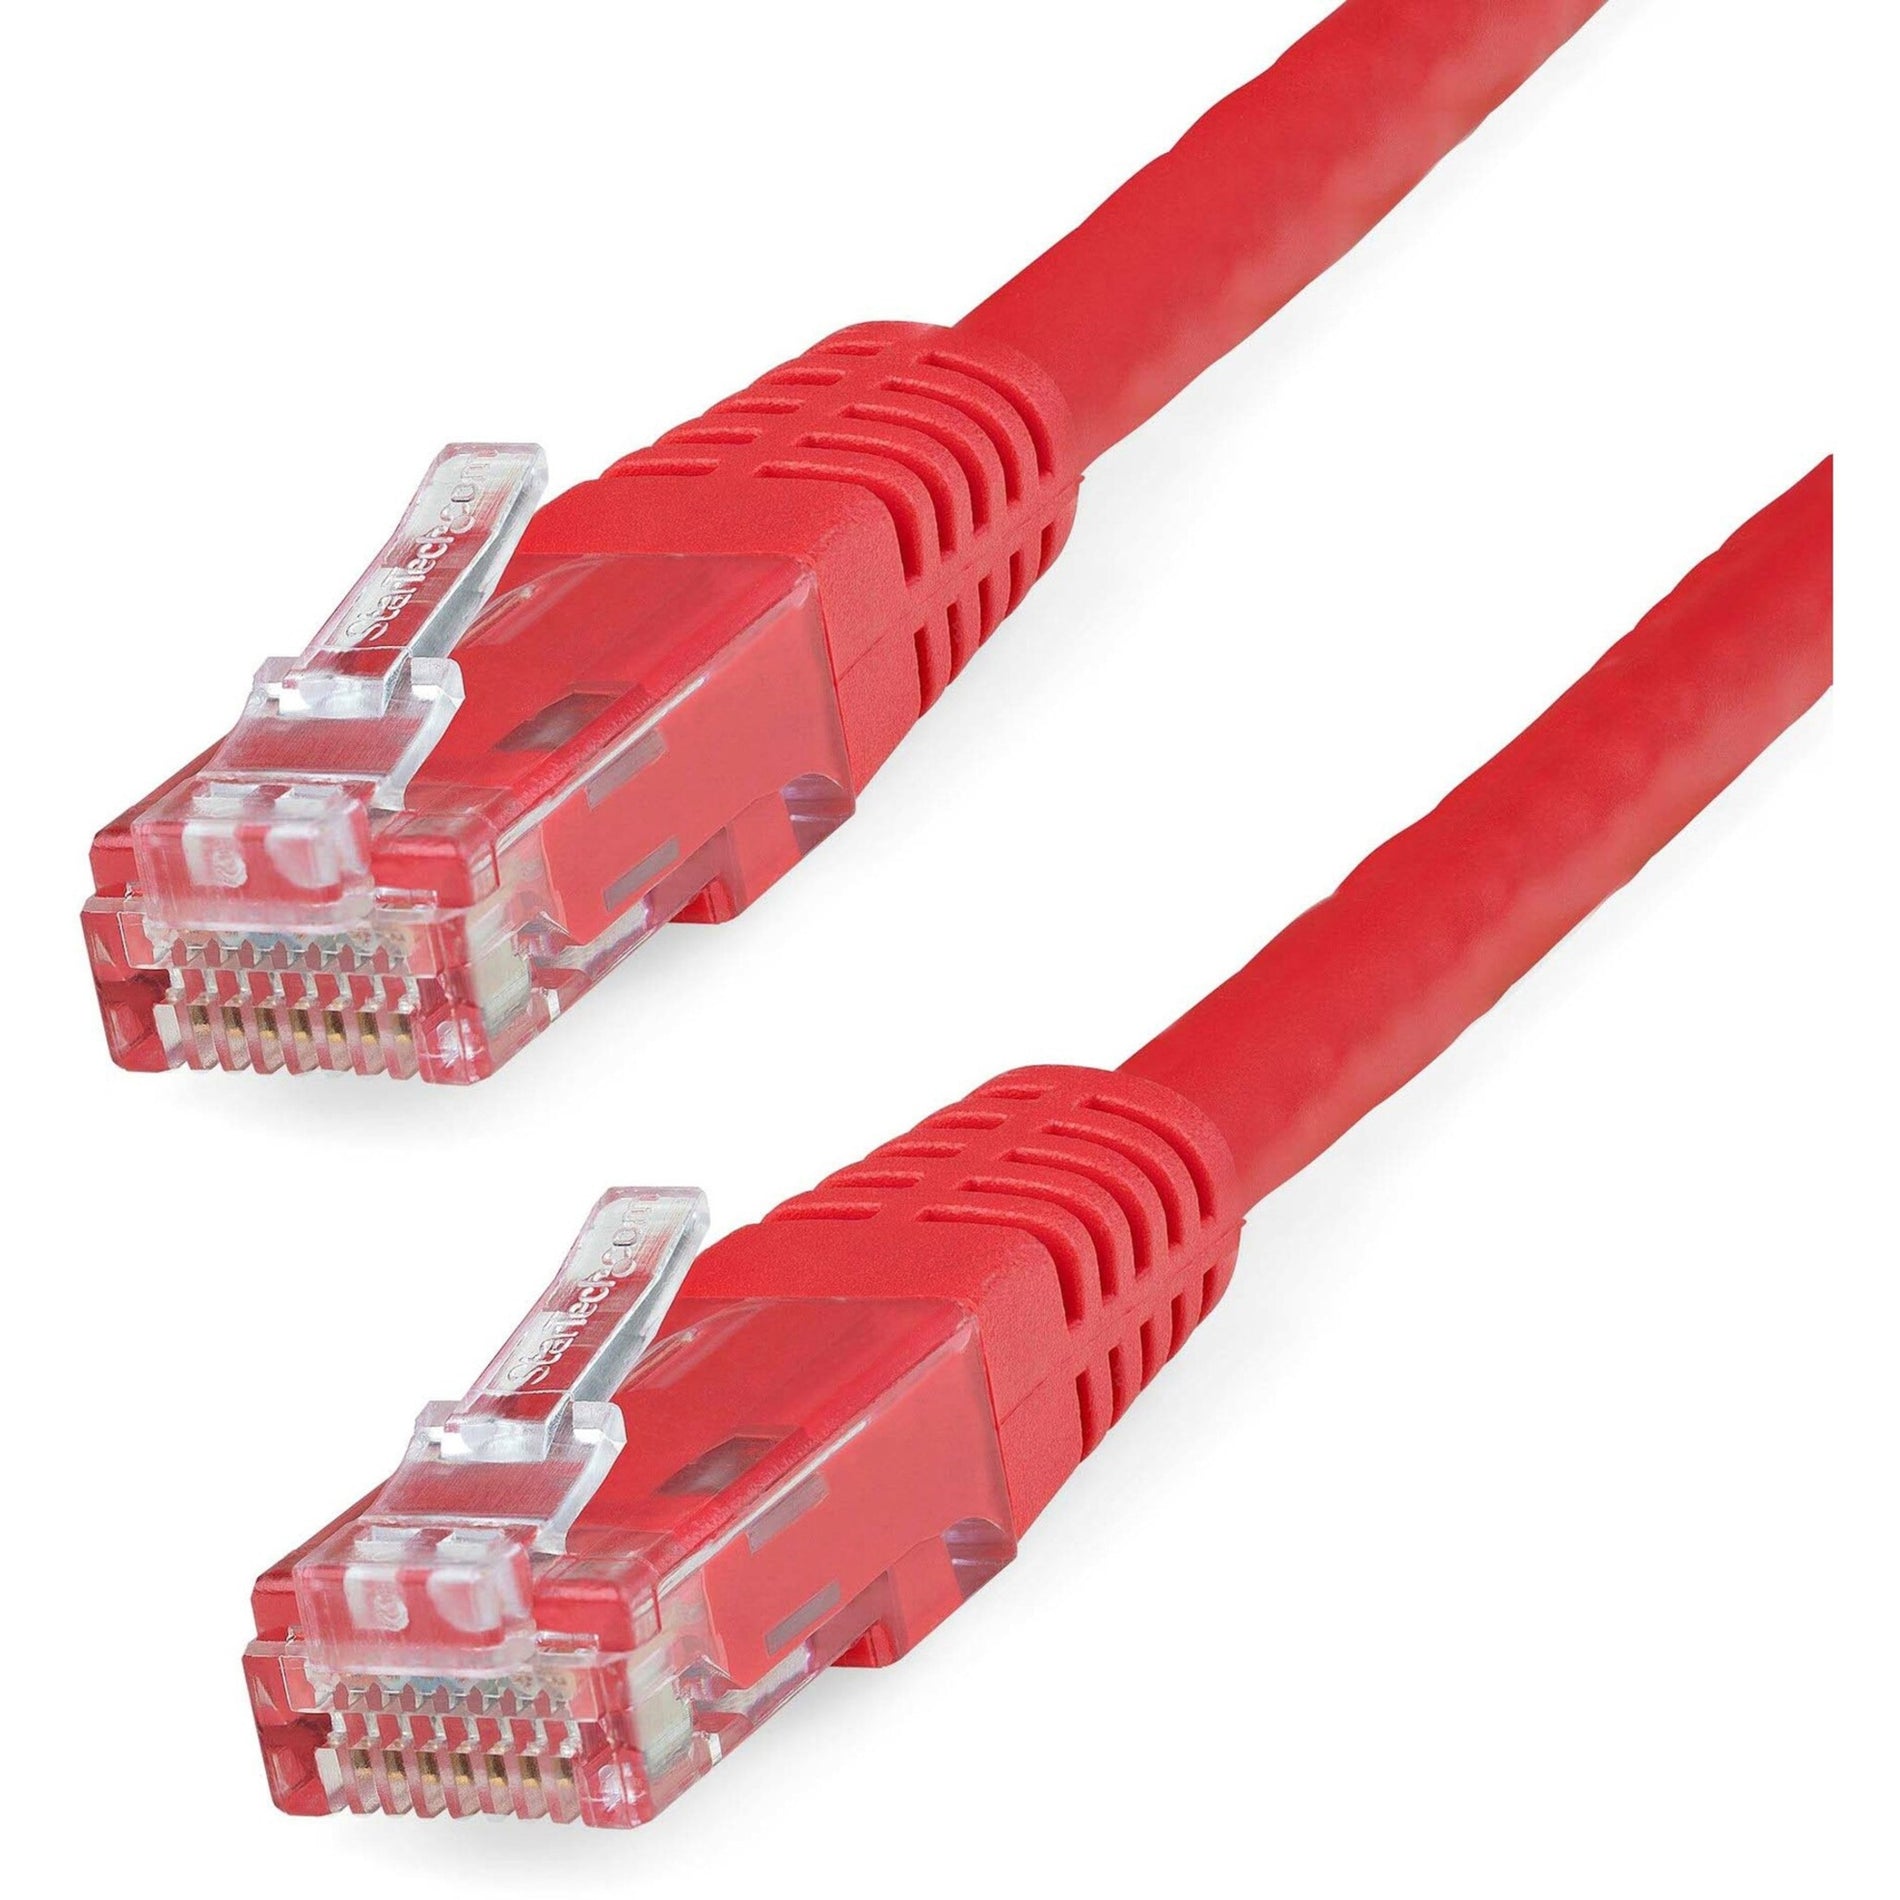 StarTech.com C6PATCH15RD 15ft Red Cat6 UTP Patch Cable ETL Verified, 10 Gbit/s Data Transfer Rate, Gold Plated Connectors